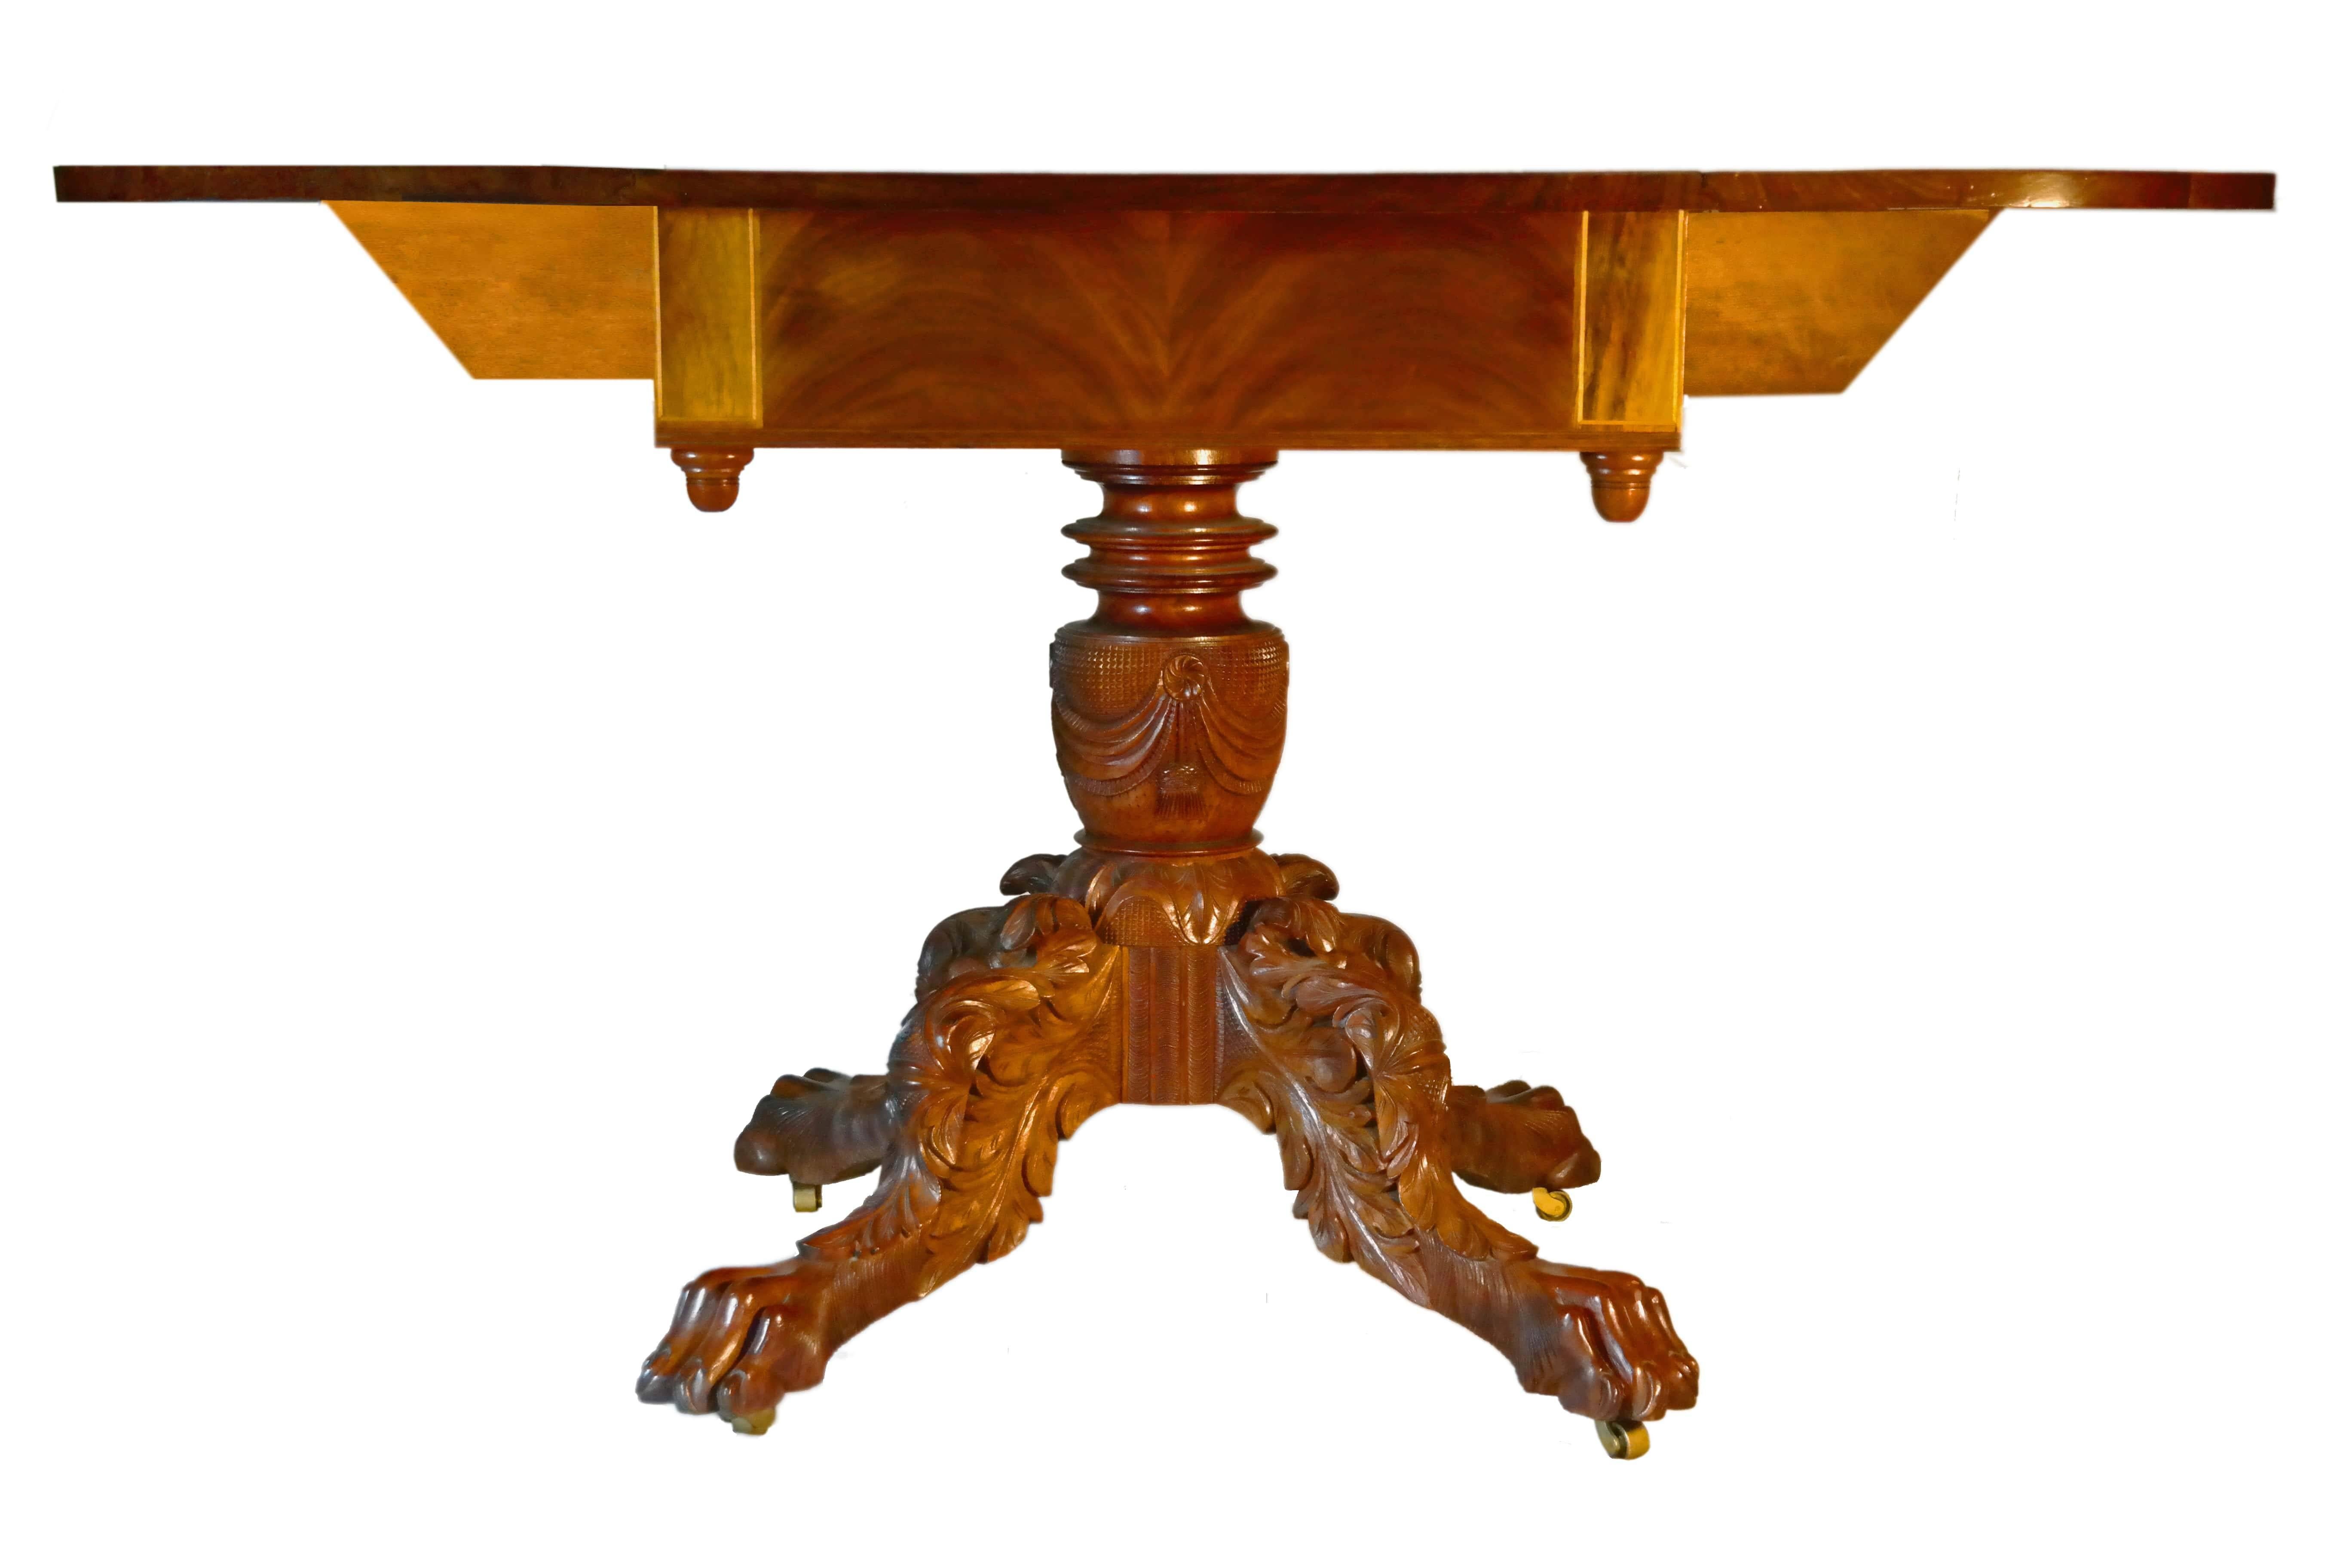 Late 19th century American mahogany Pembroke table. Top made of single solid boards with figured mahogany leaves. Satinwood stringing inlaid into mahogany skirt with an elaborately carved pedestal base resting on lion feet with original brass